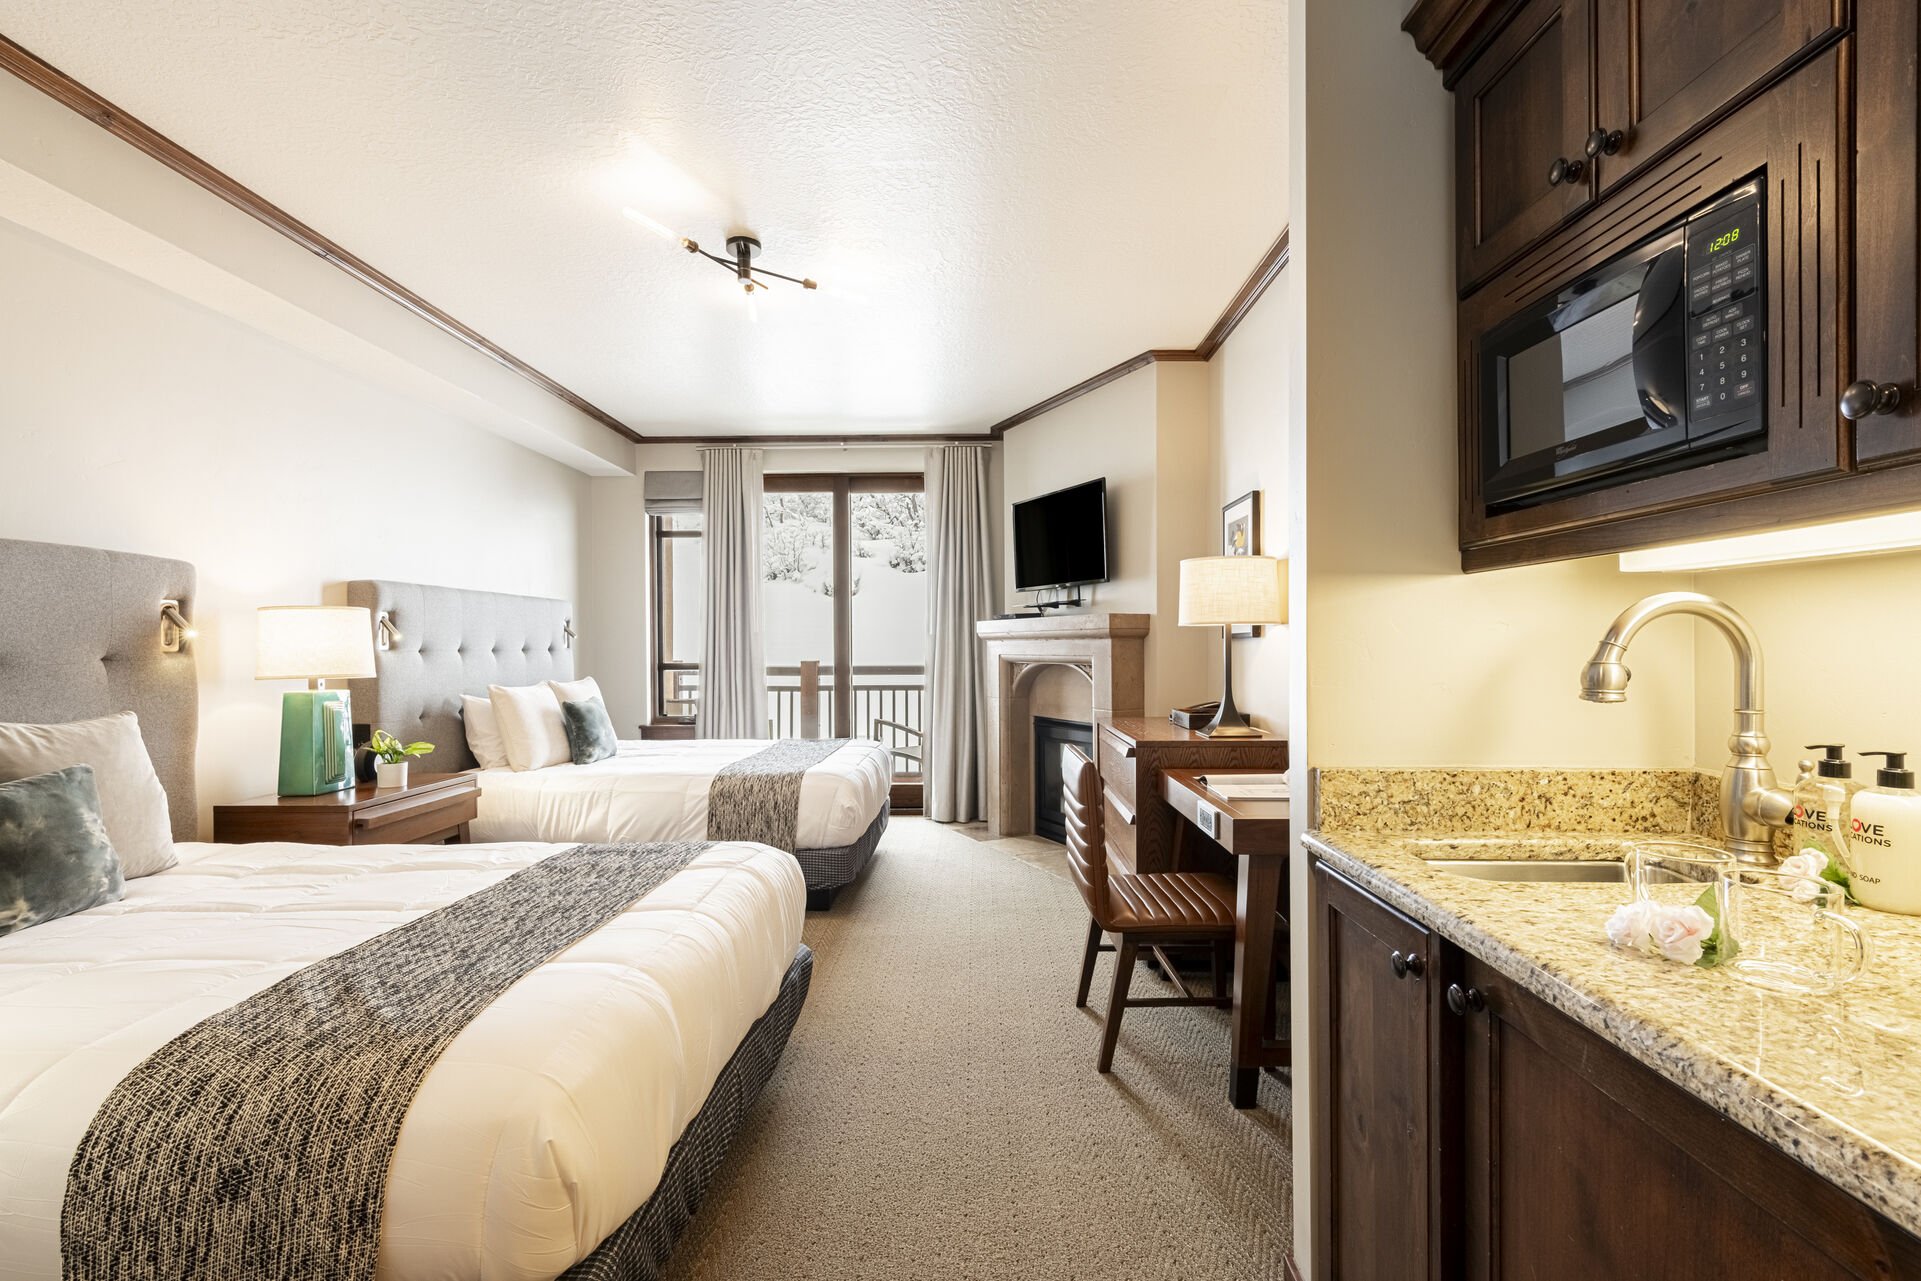 Guest Suite 4 (Unit C) wet bar with a mini fridge, Keurig and Drip coffee maker, a microwave, and private bathroom